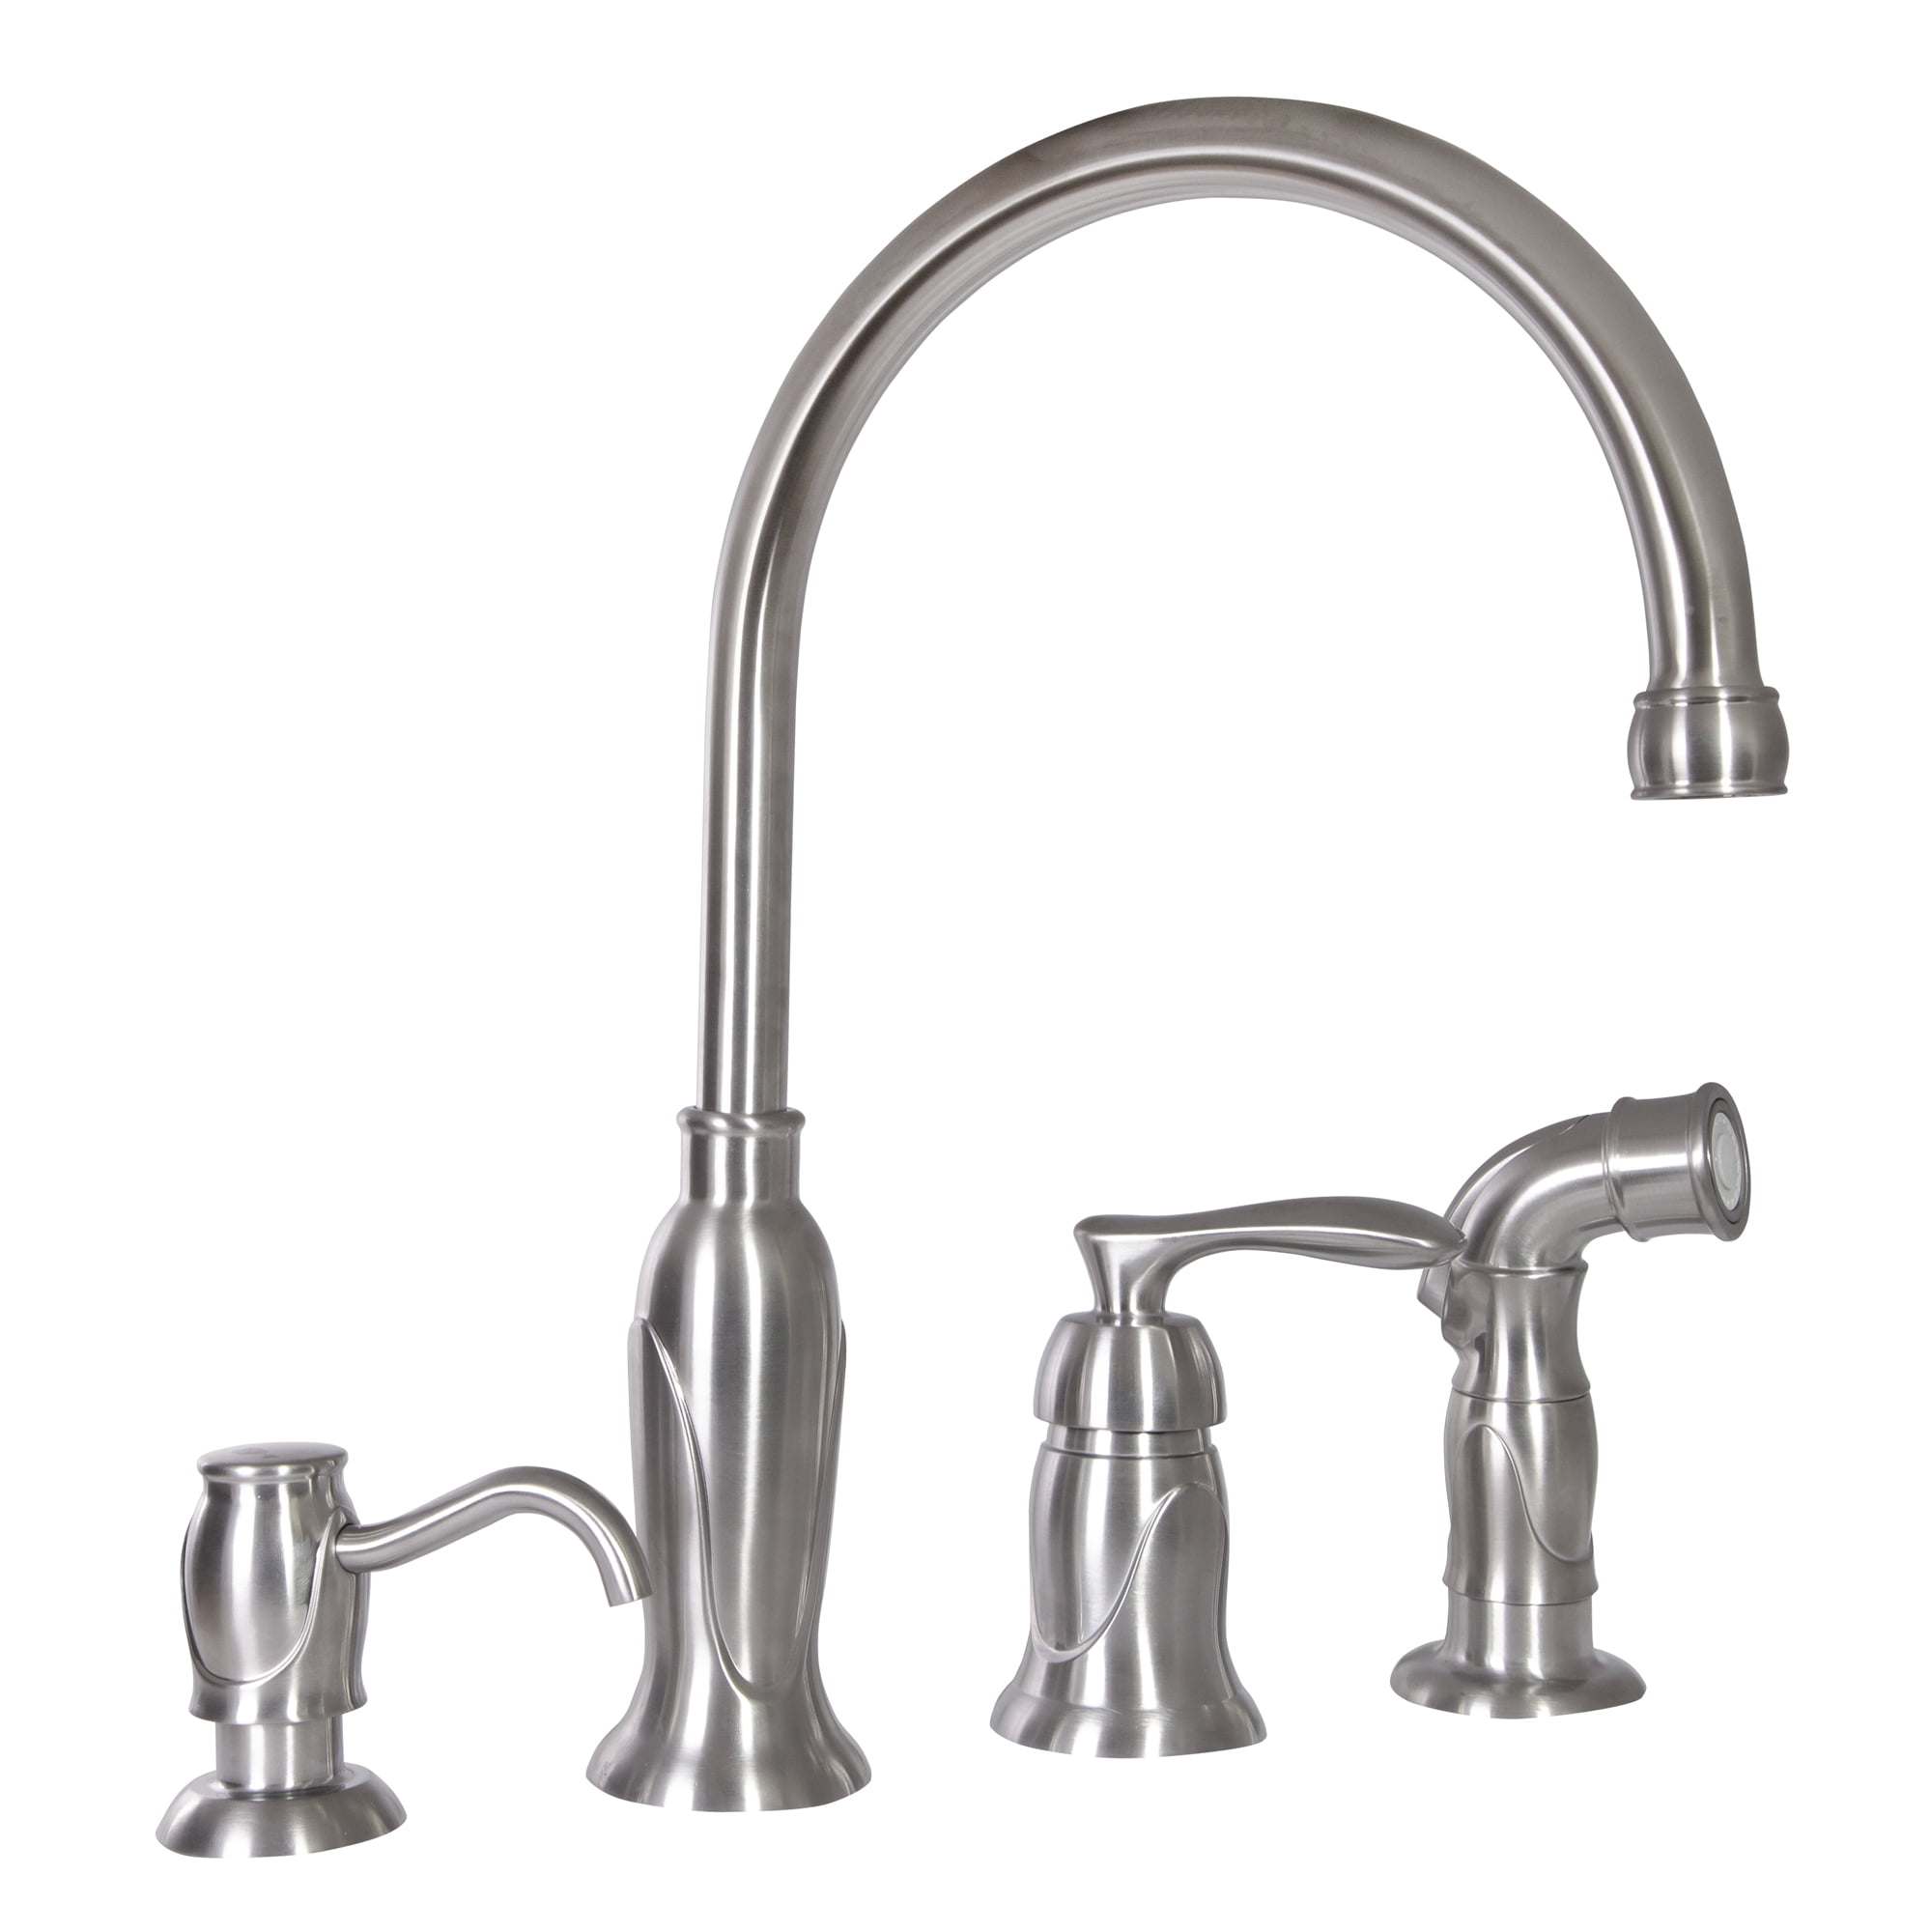 Details about   Peerless Xander Single Handle Pull-Down Kitchen Faucet in Stainless P7919LF-SS 